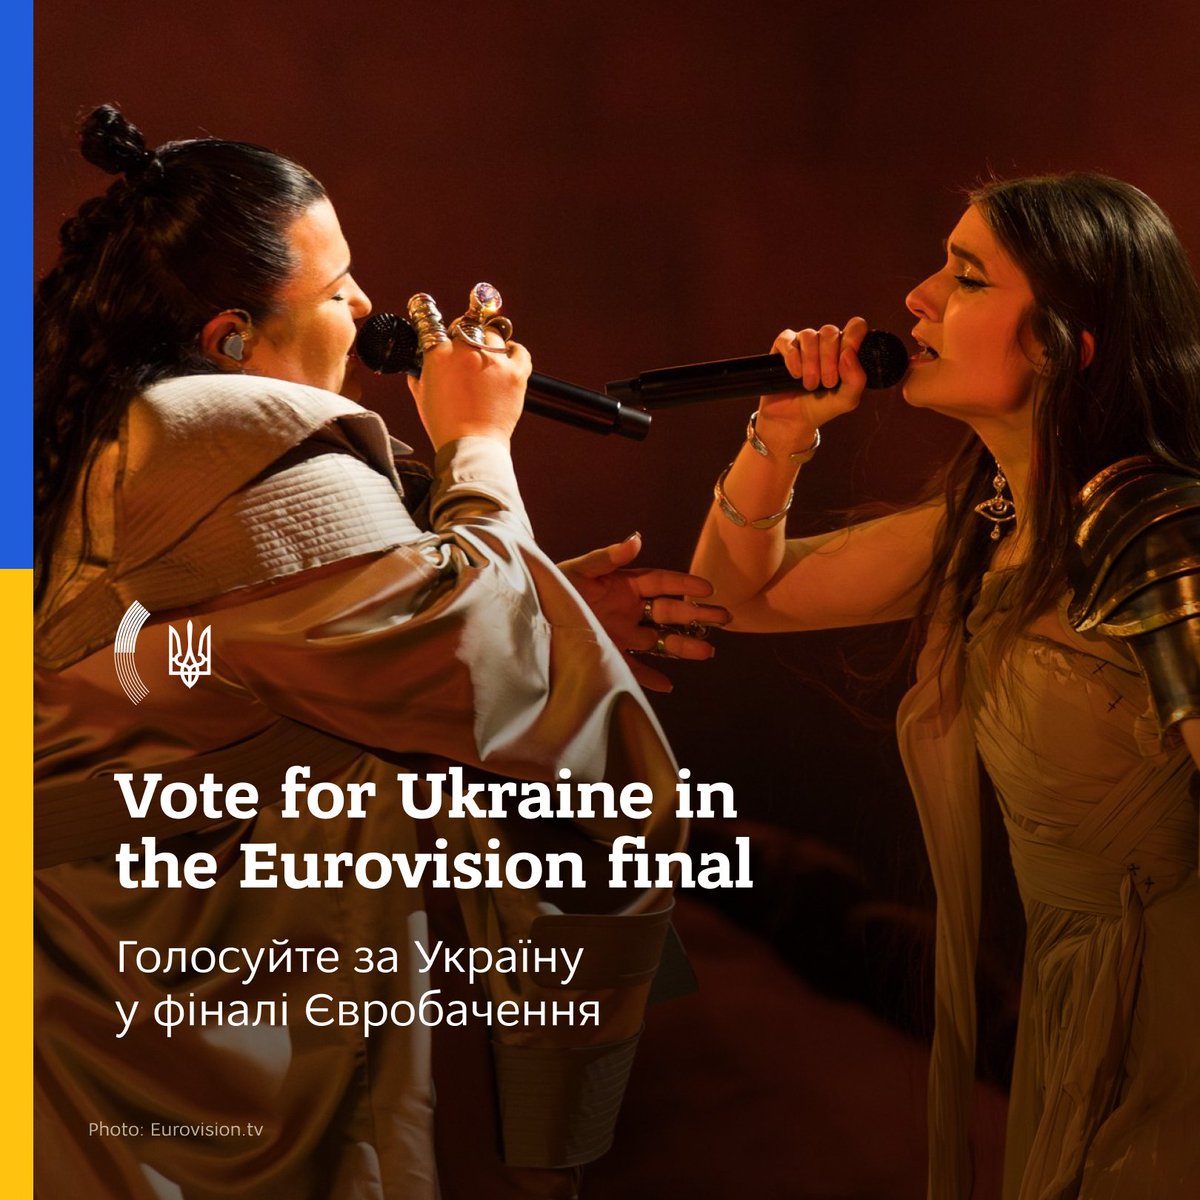 🇺🇦 Watch and support Ukraine under #2 in #Eurovision final this Saturday, May 11th at 21:00 CET! alyona alyona and Jerry Heil will perform with the song 'Maria & Teresa'

Vote using SMS or through the official Eurovision app ☑️

#WorldOnHerShoulders #Eurovision